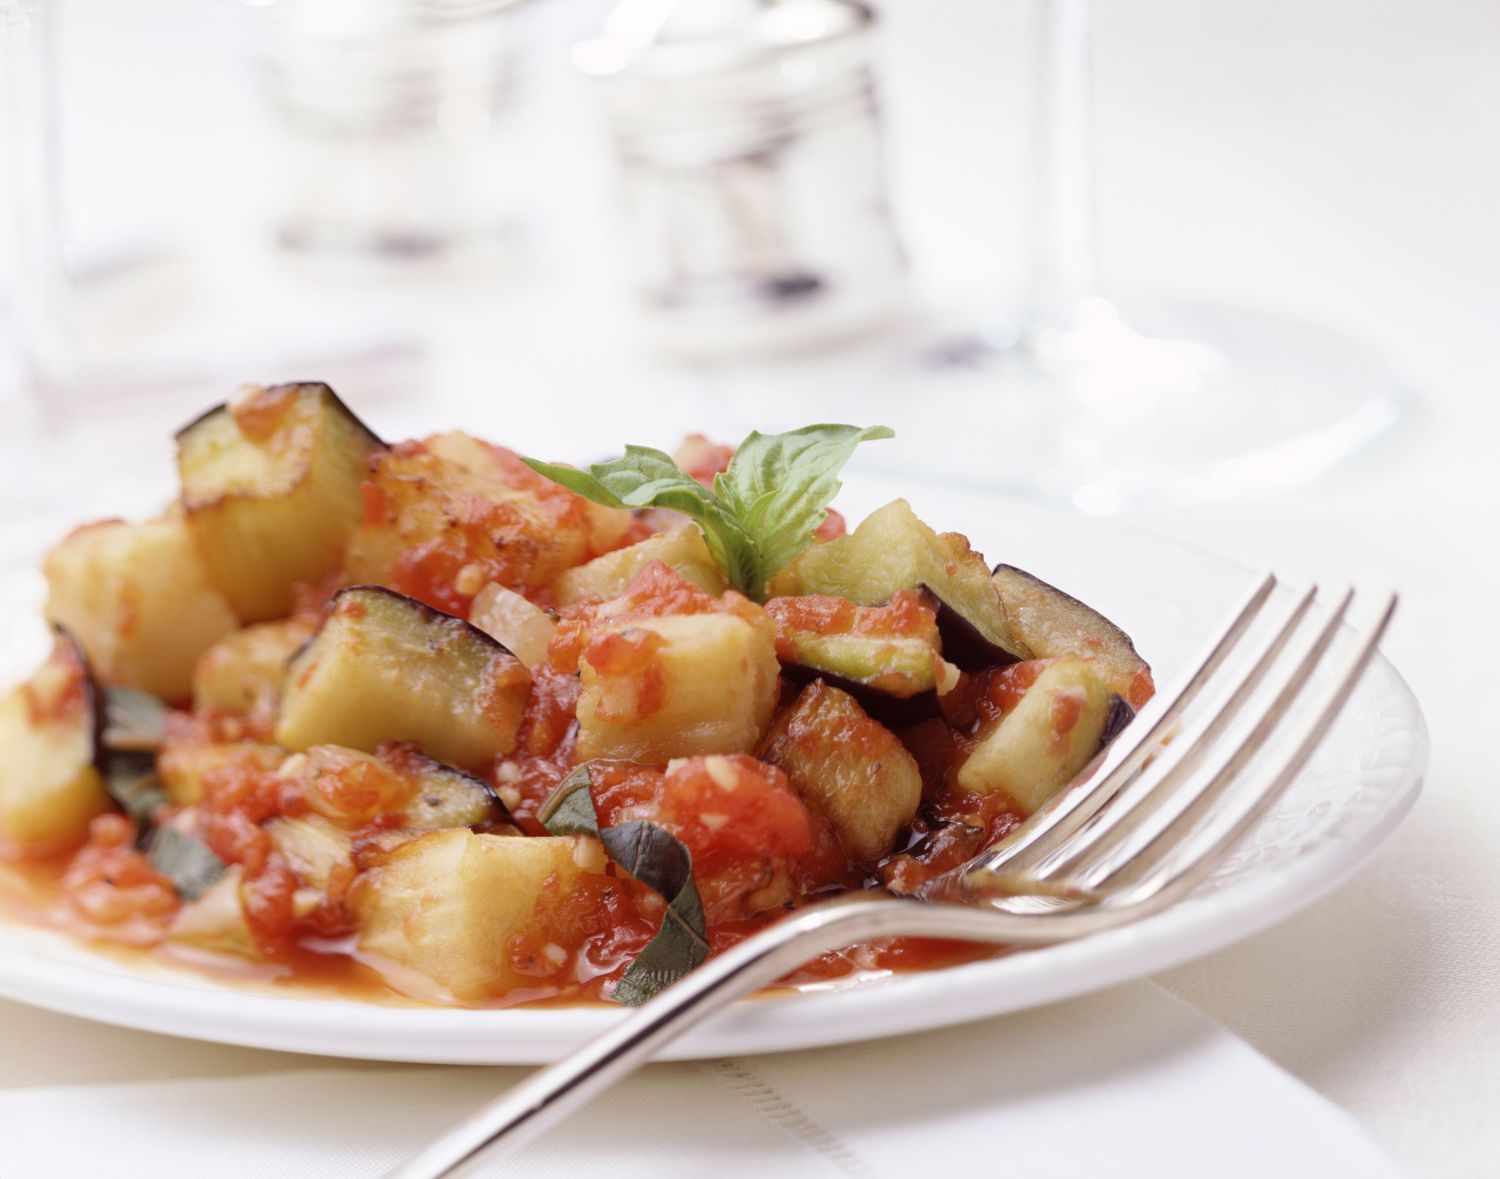 Ratatouille With Eggplant, Tomatoes, and Herbs